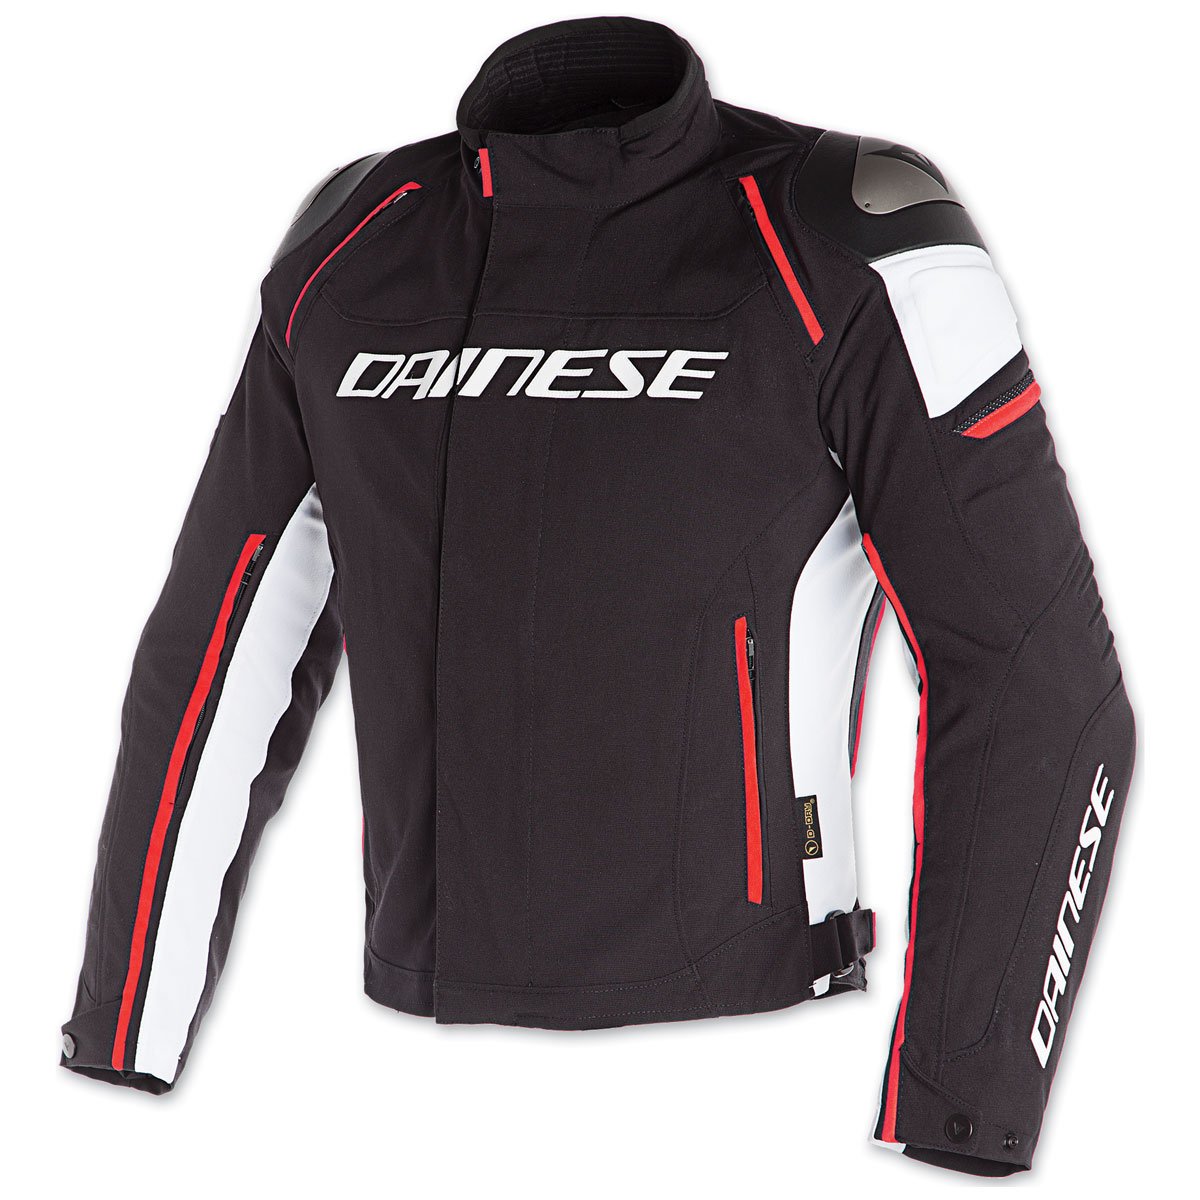 Image of Dainese Racing 3 D-Dry Jacket Black White Fluo Red Size 44 EN